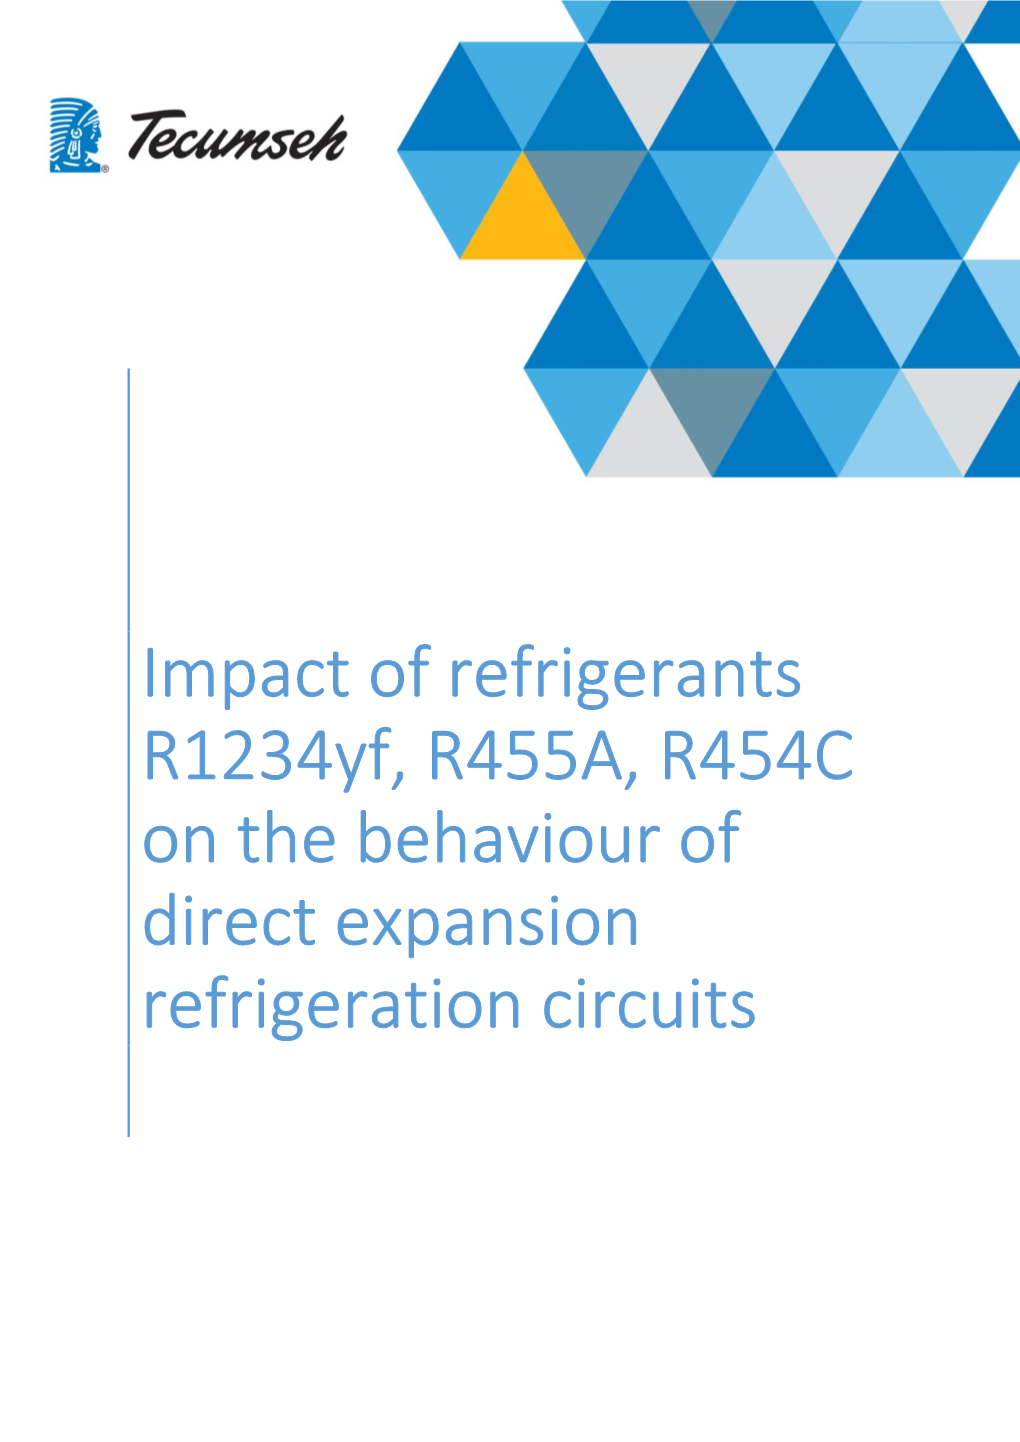 Impact of Refrigerants R1234yf, R455A, R454C on the Behaviour of Direct Expansion Refrigeration Circuits